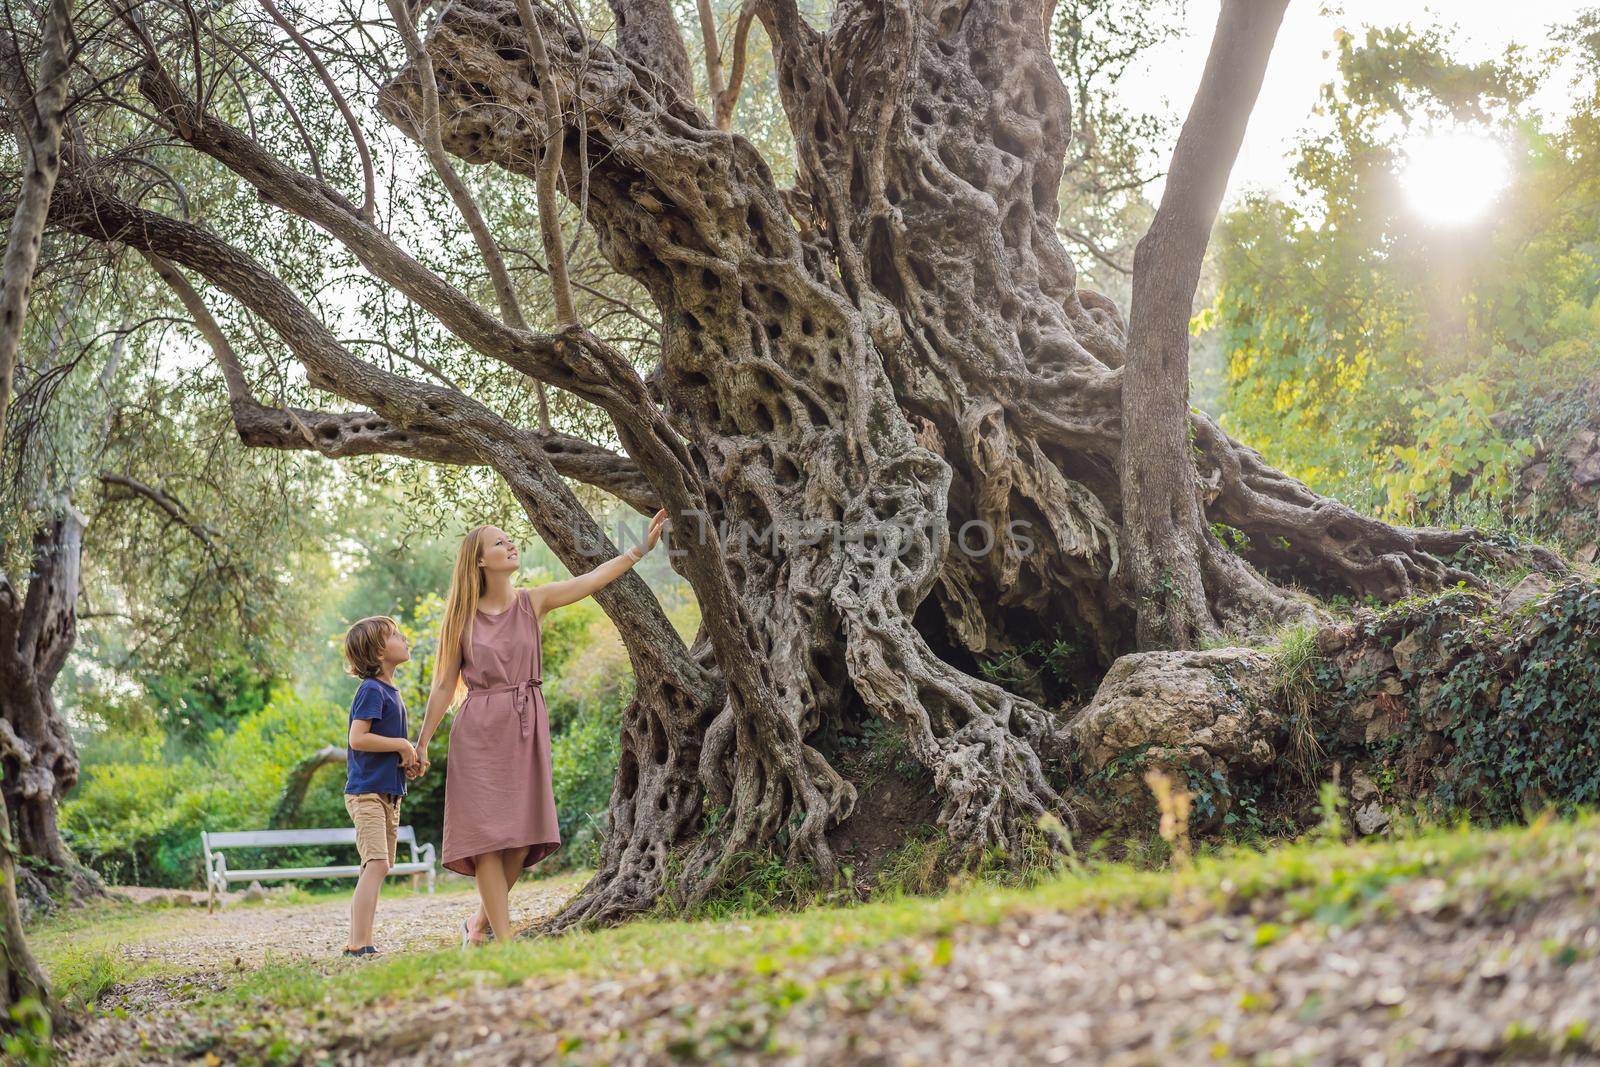 Mom and son tourists looking at 2000 years old olive tree: Stara Maslina in Budva, Montenegro. It is thought to be the oldest tree in Europe and is a tourist attraction. In the background the montenegrin mountains. Europe.